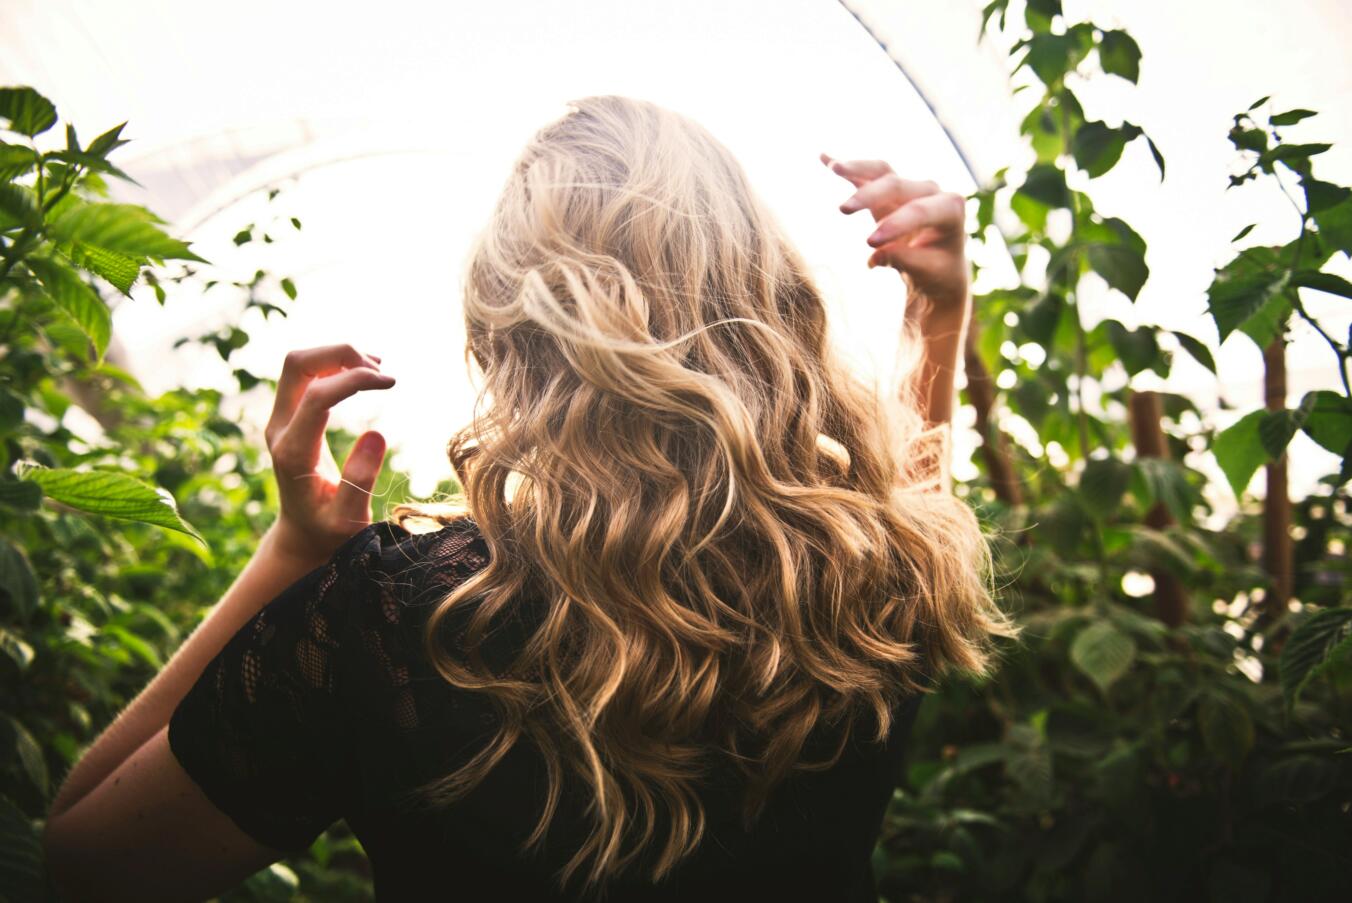 Woman with curly blonde hair walking by plants